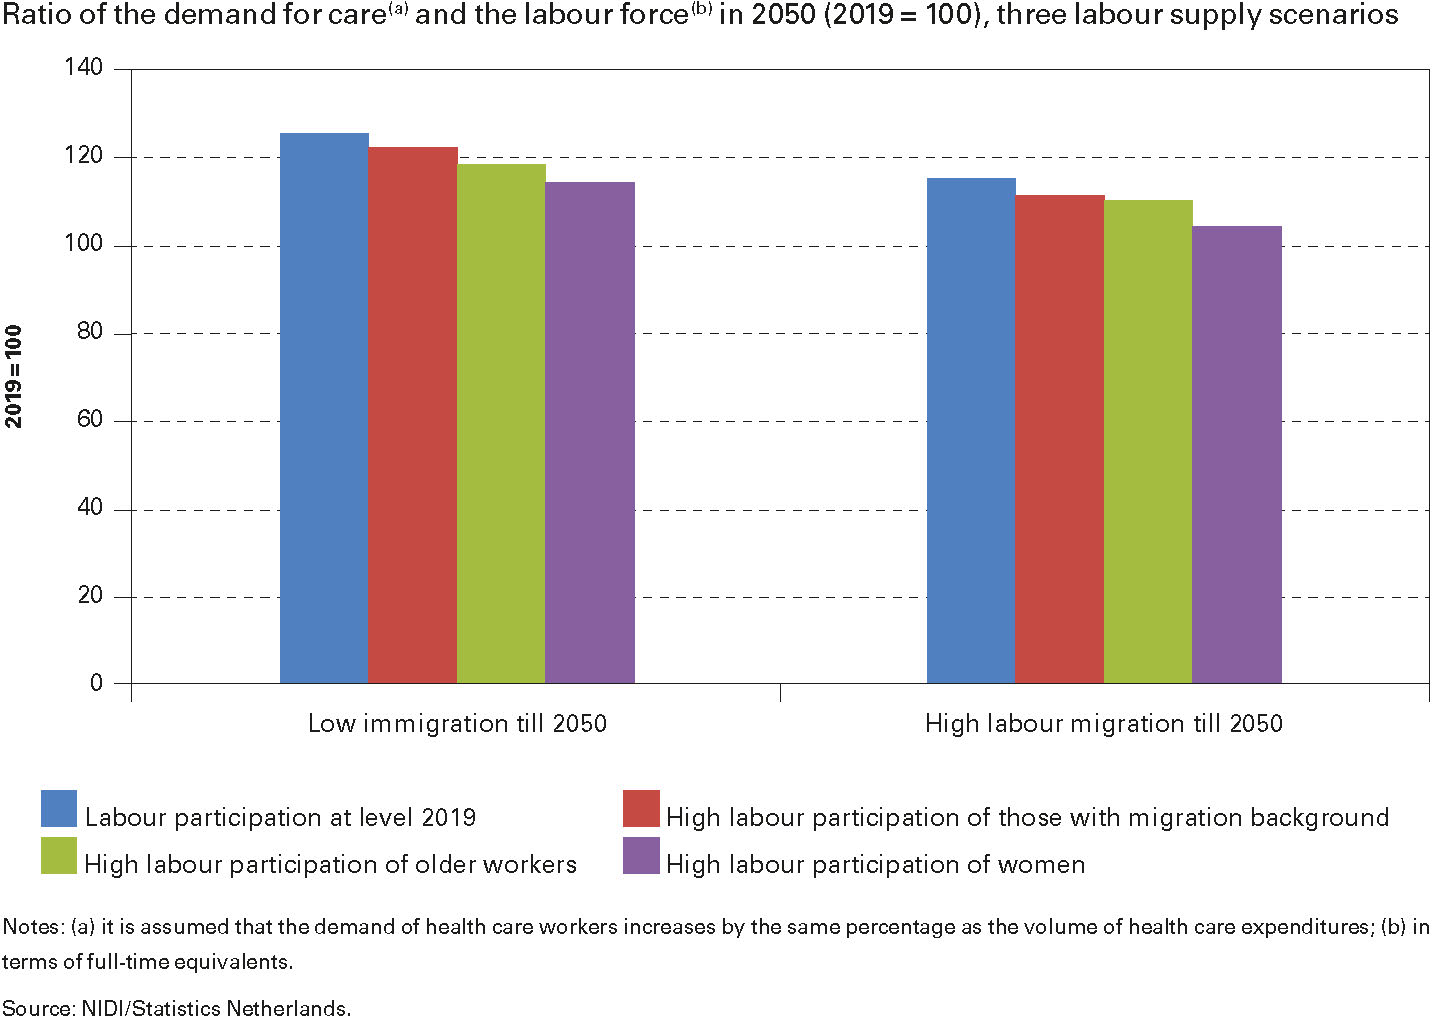 Ratio of the demand for care(a) and the labour force(b) in 2050 (2019 = 100), three labour supply scenarios